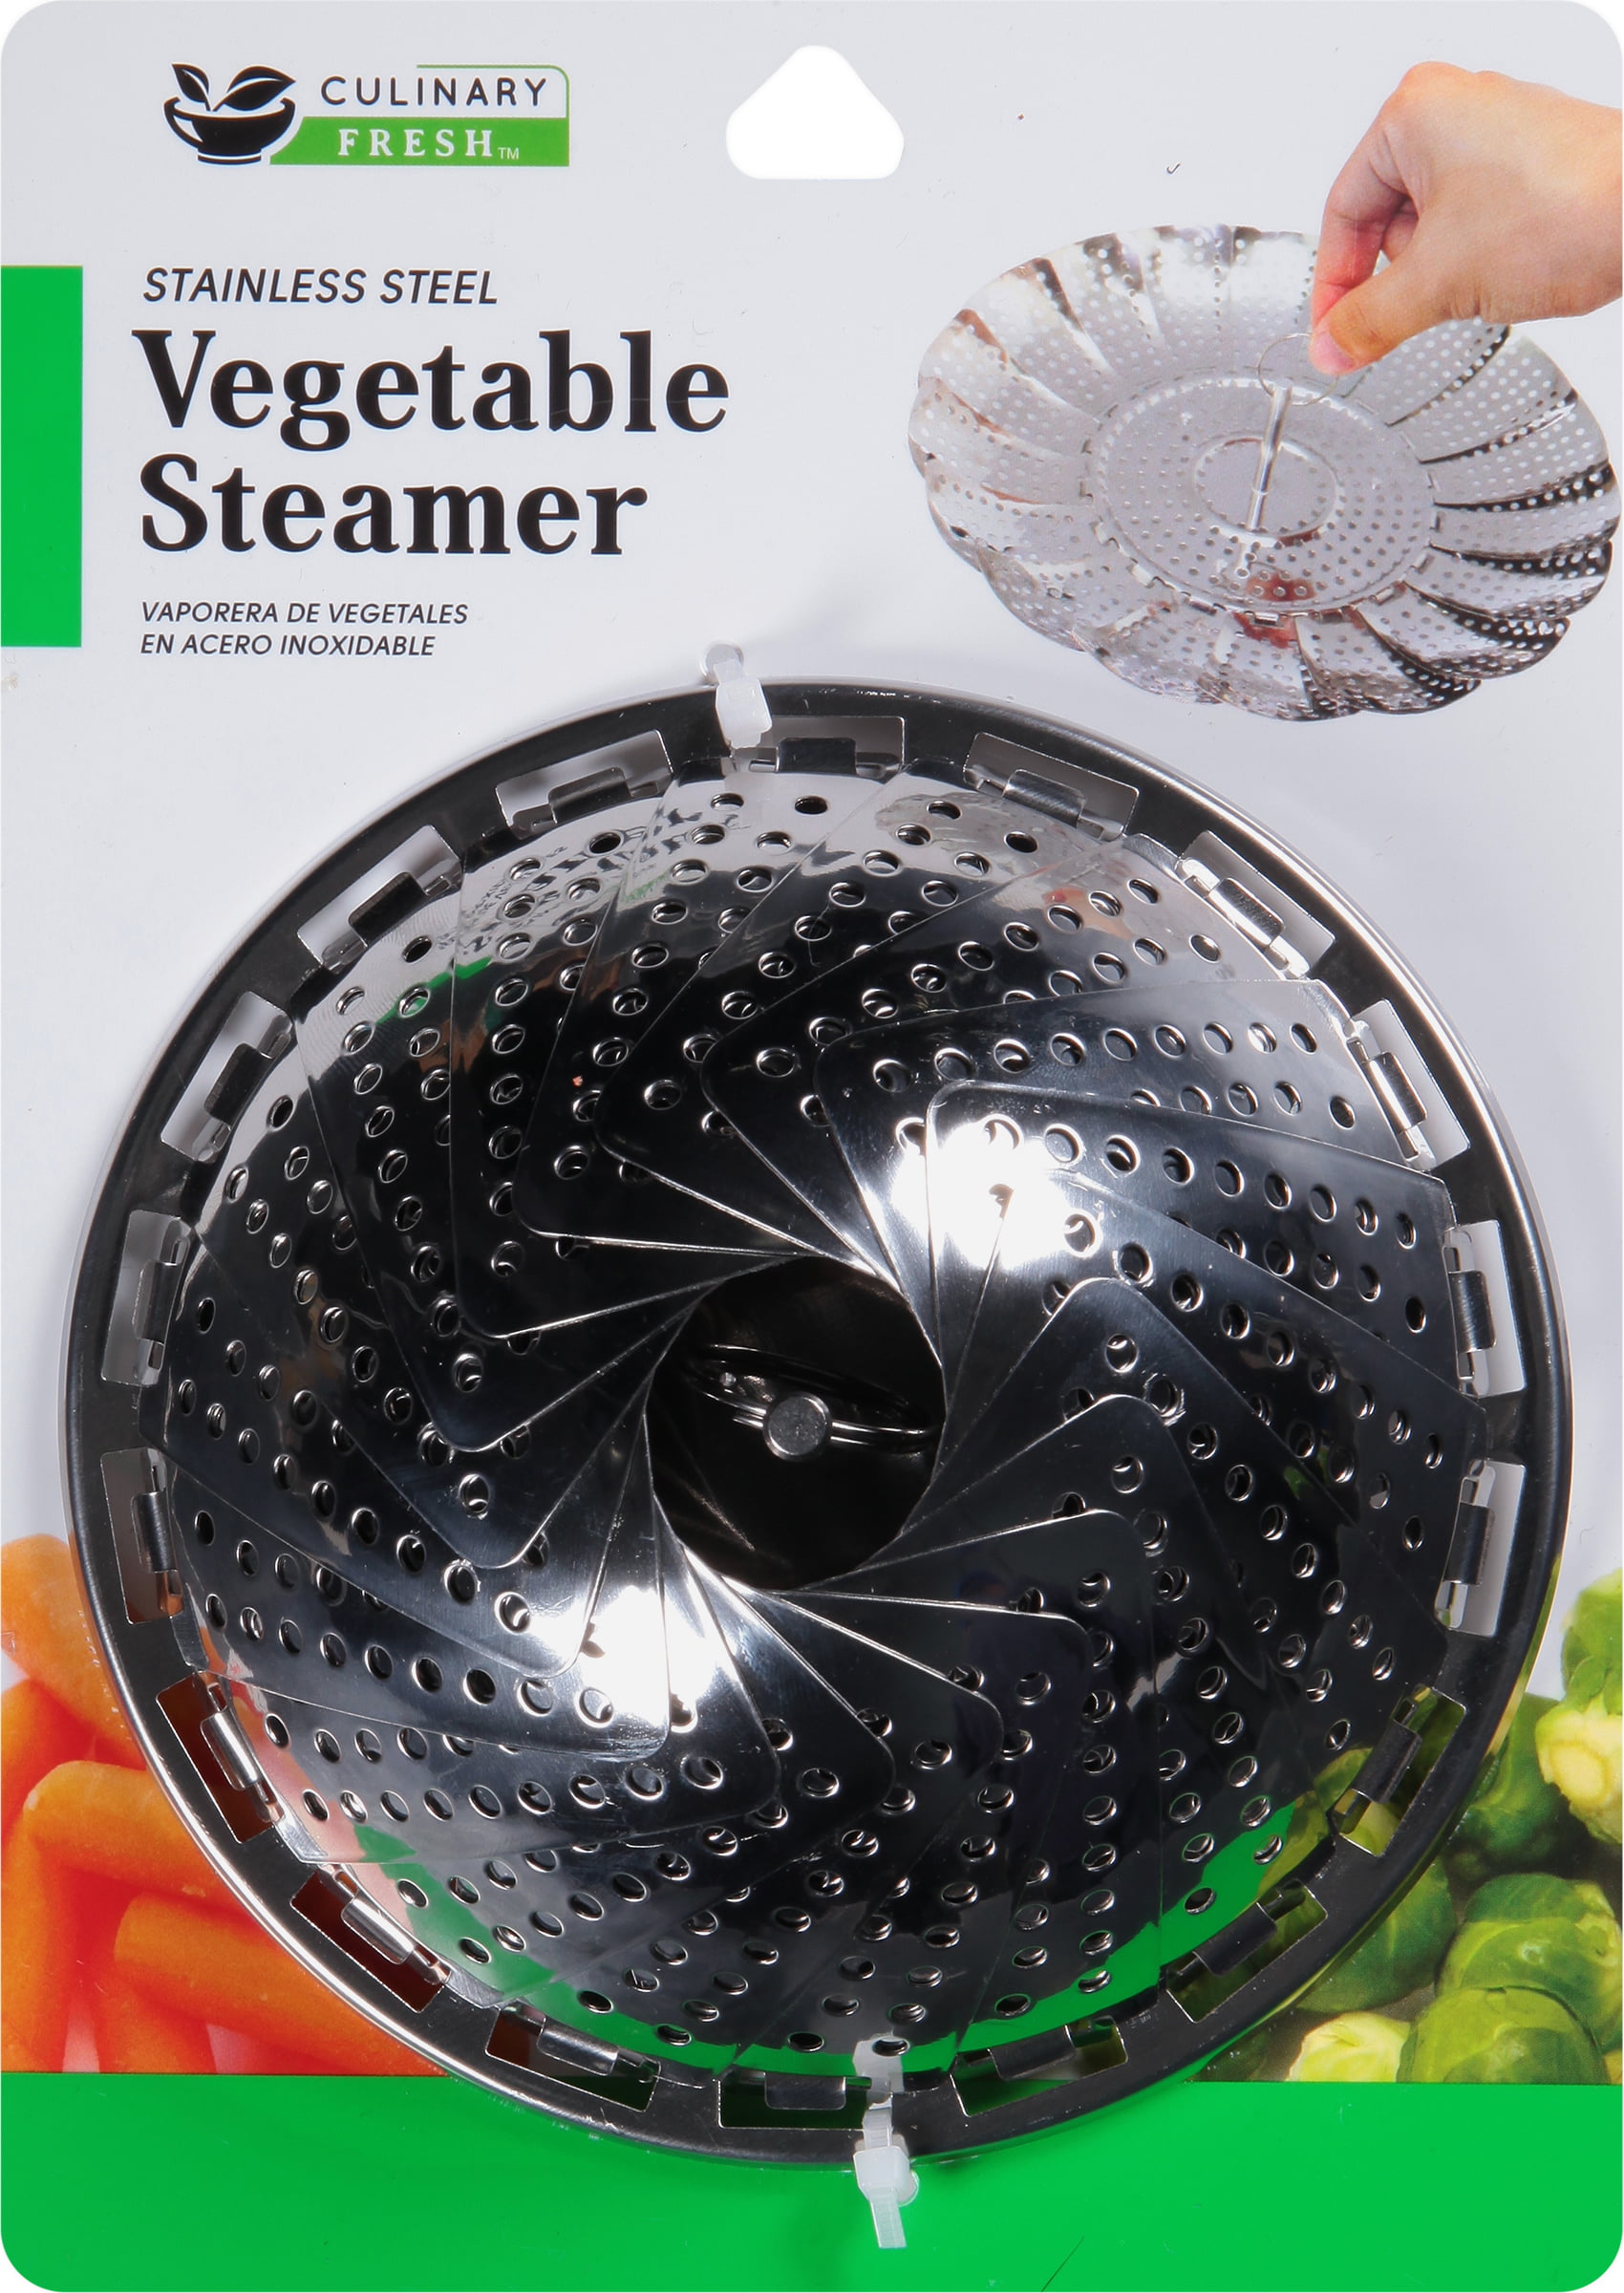 CHUXI Stainless Steel Lotus-Shaped Steaming Tray Collapsible Vegetable Steamer Basket Fruit Tray